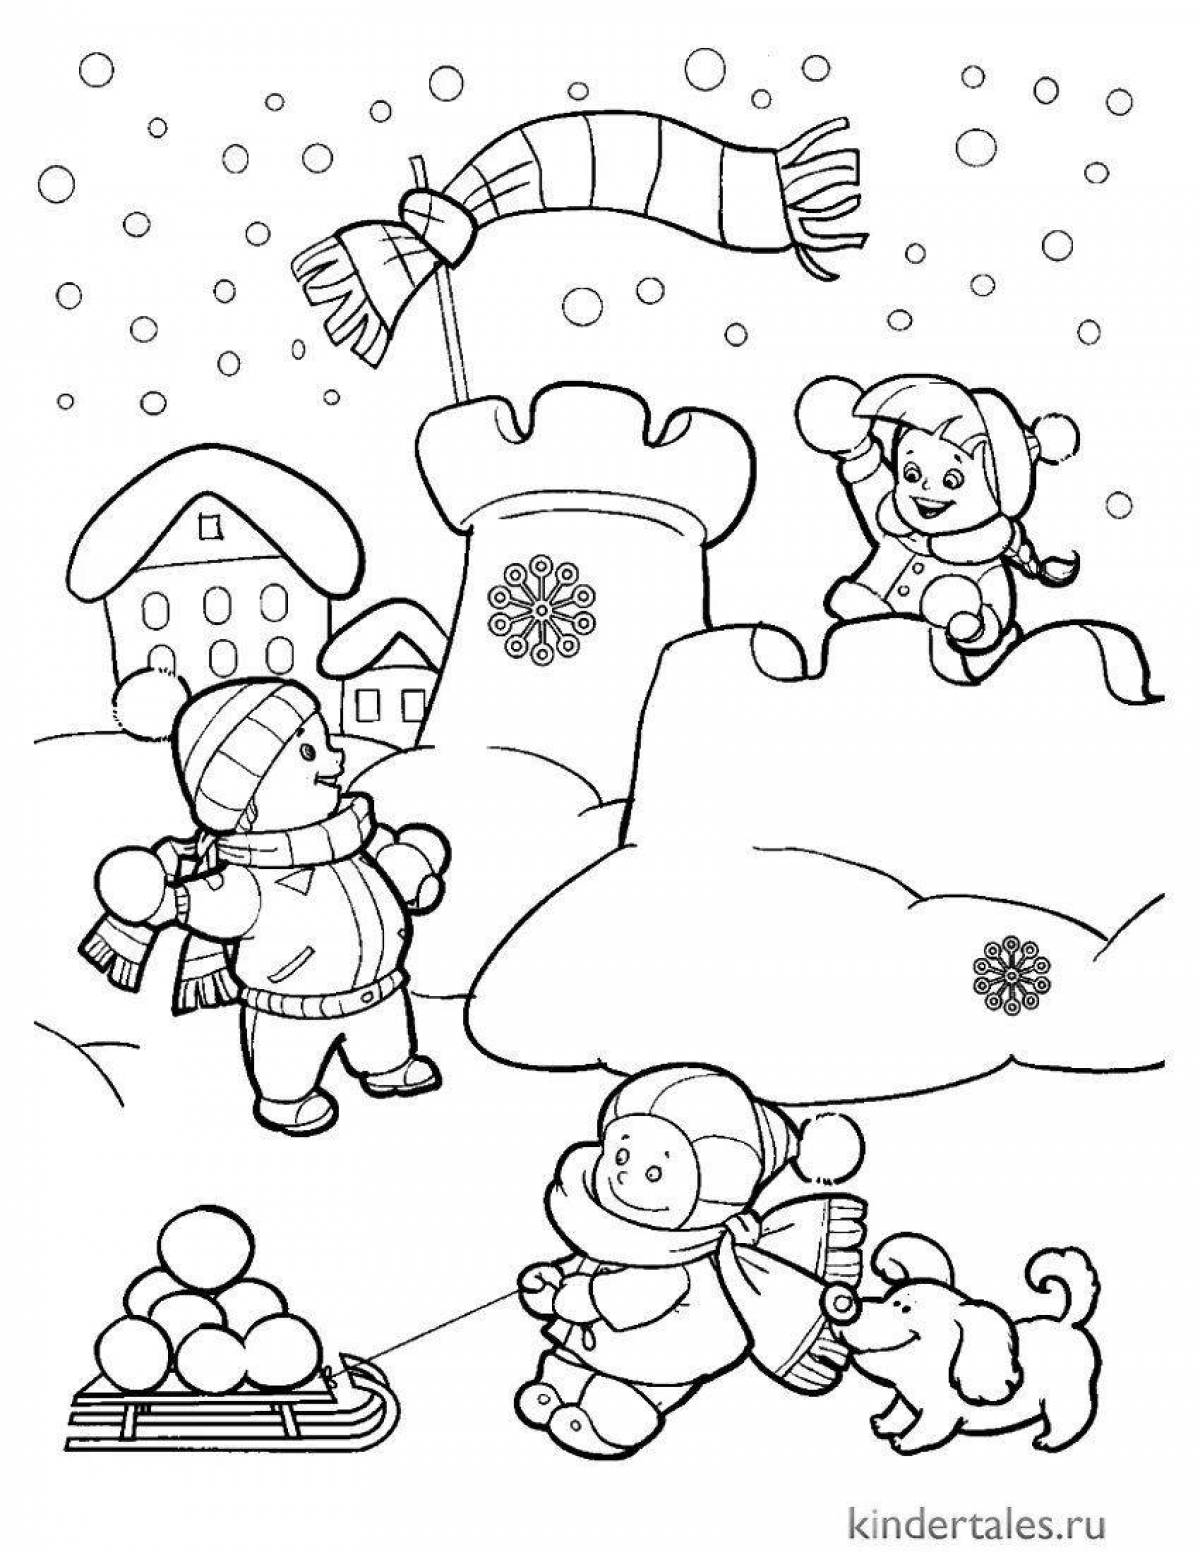 Fun coloring book winter activities for children 6 years old